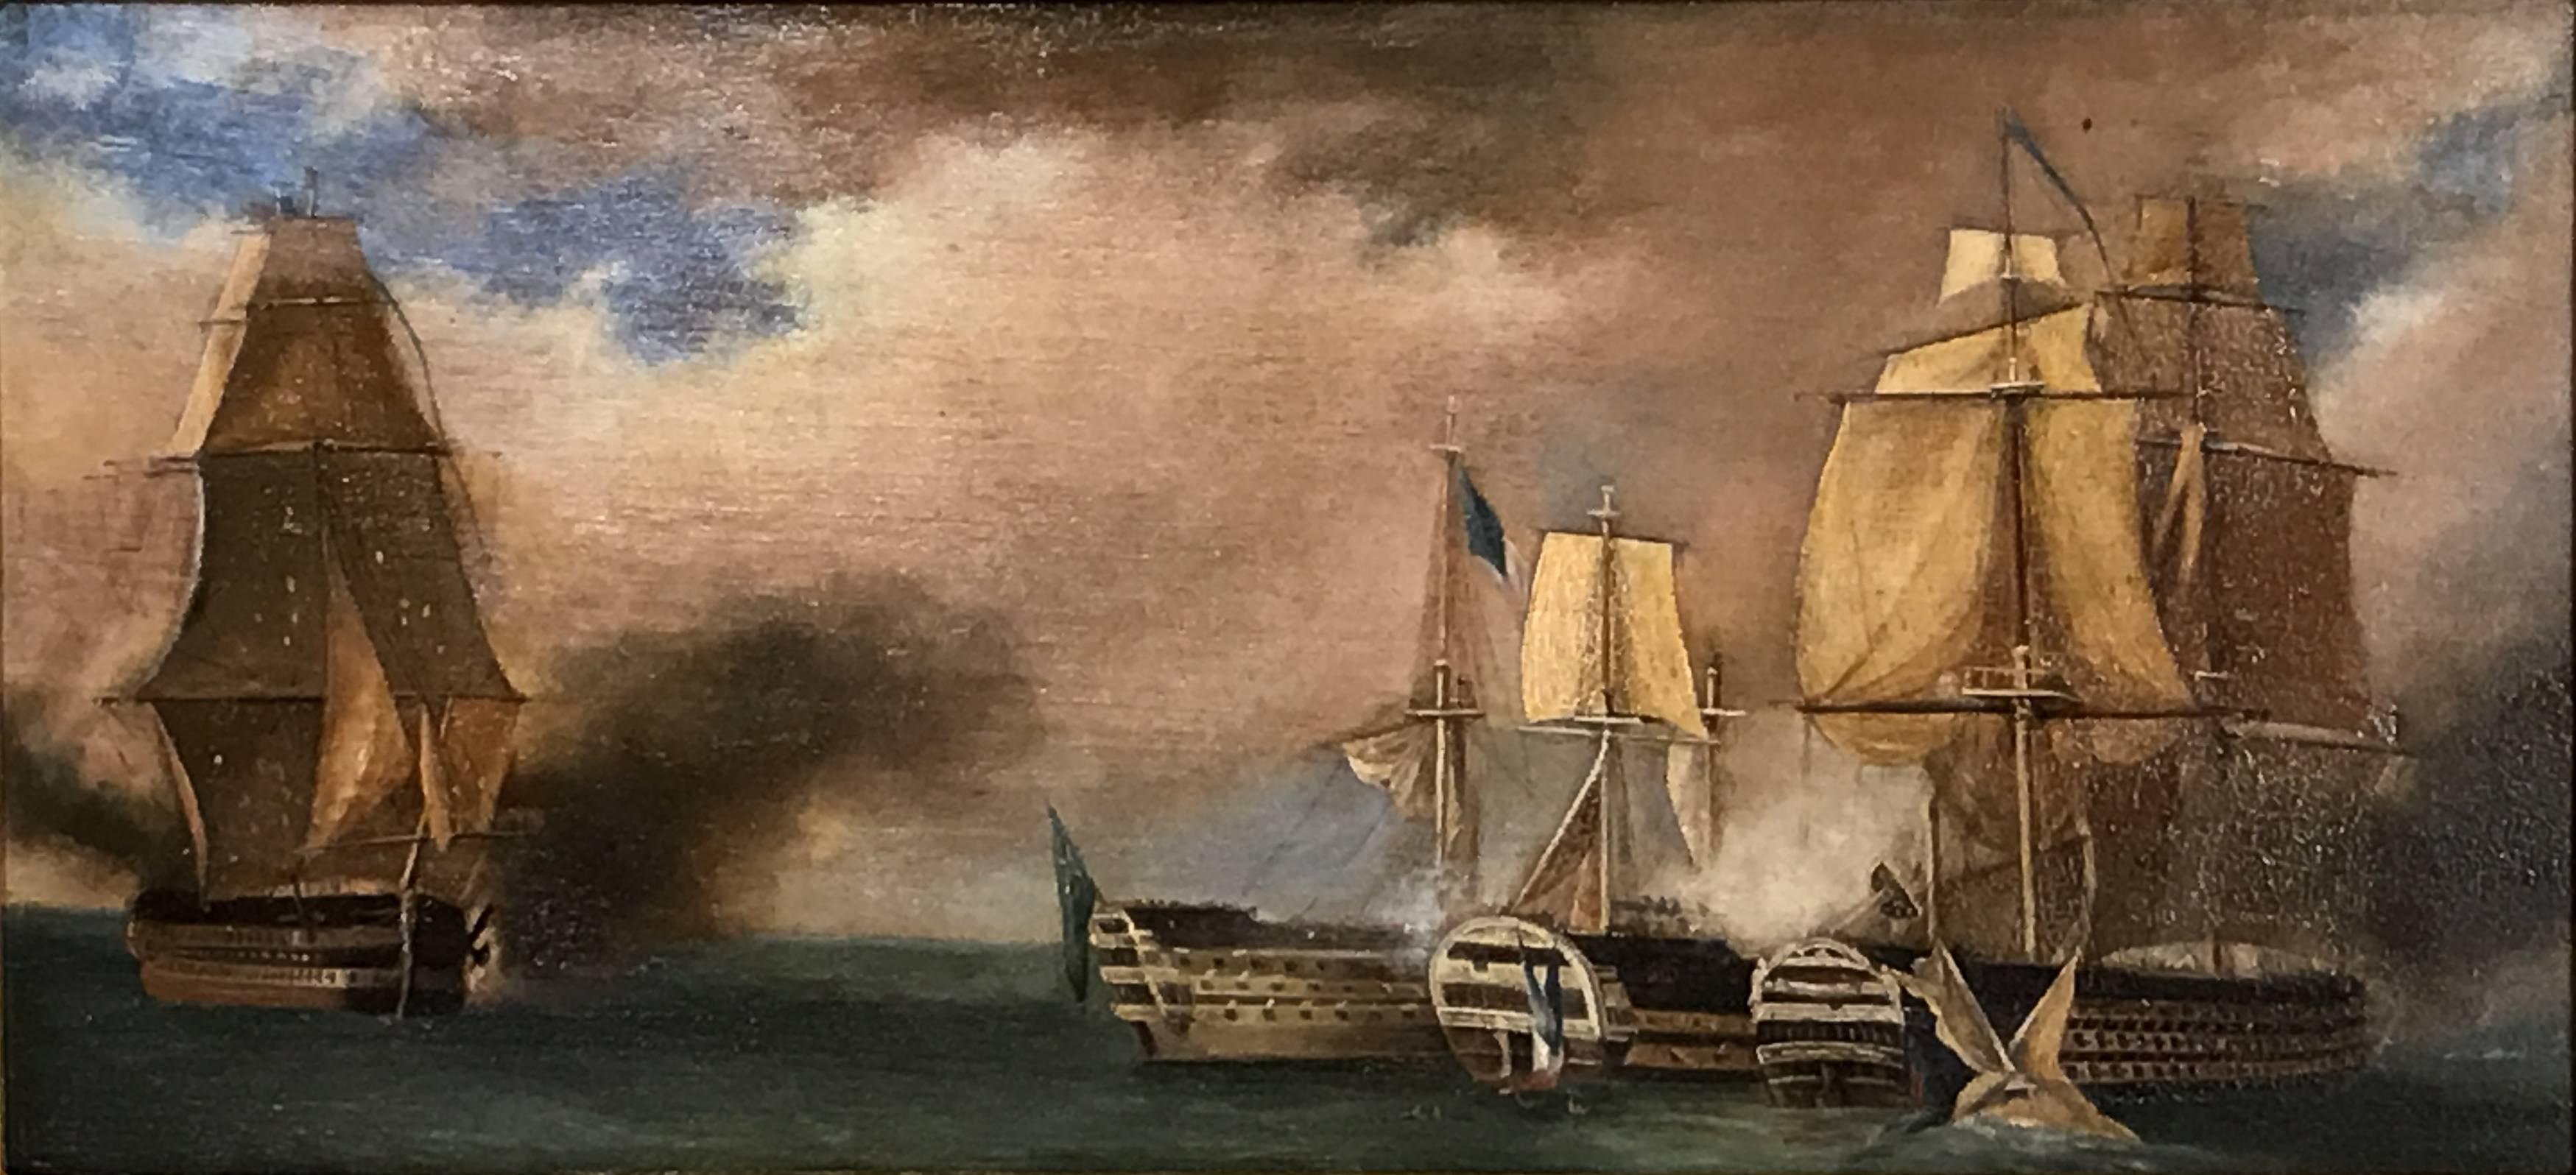 Pair of 19th Century Ship Battle Scenes - Realist Painting by Unknown